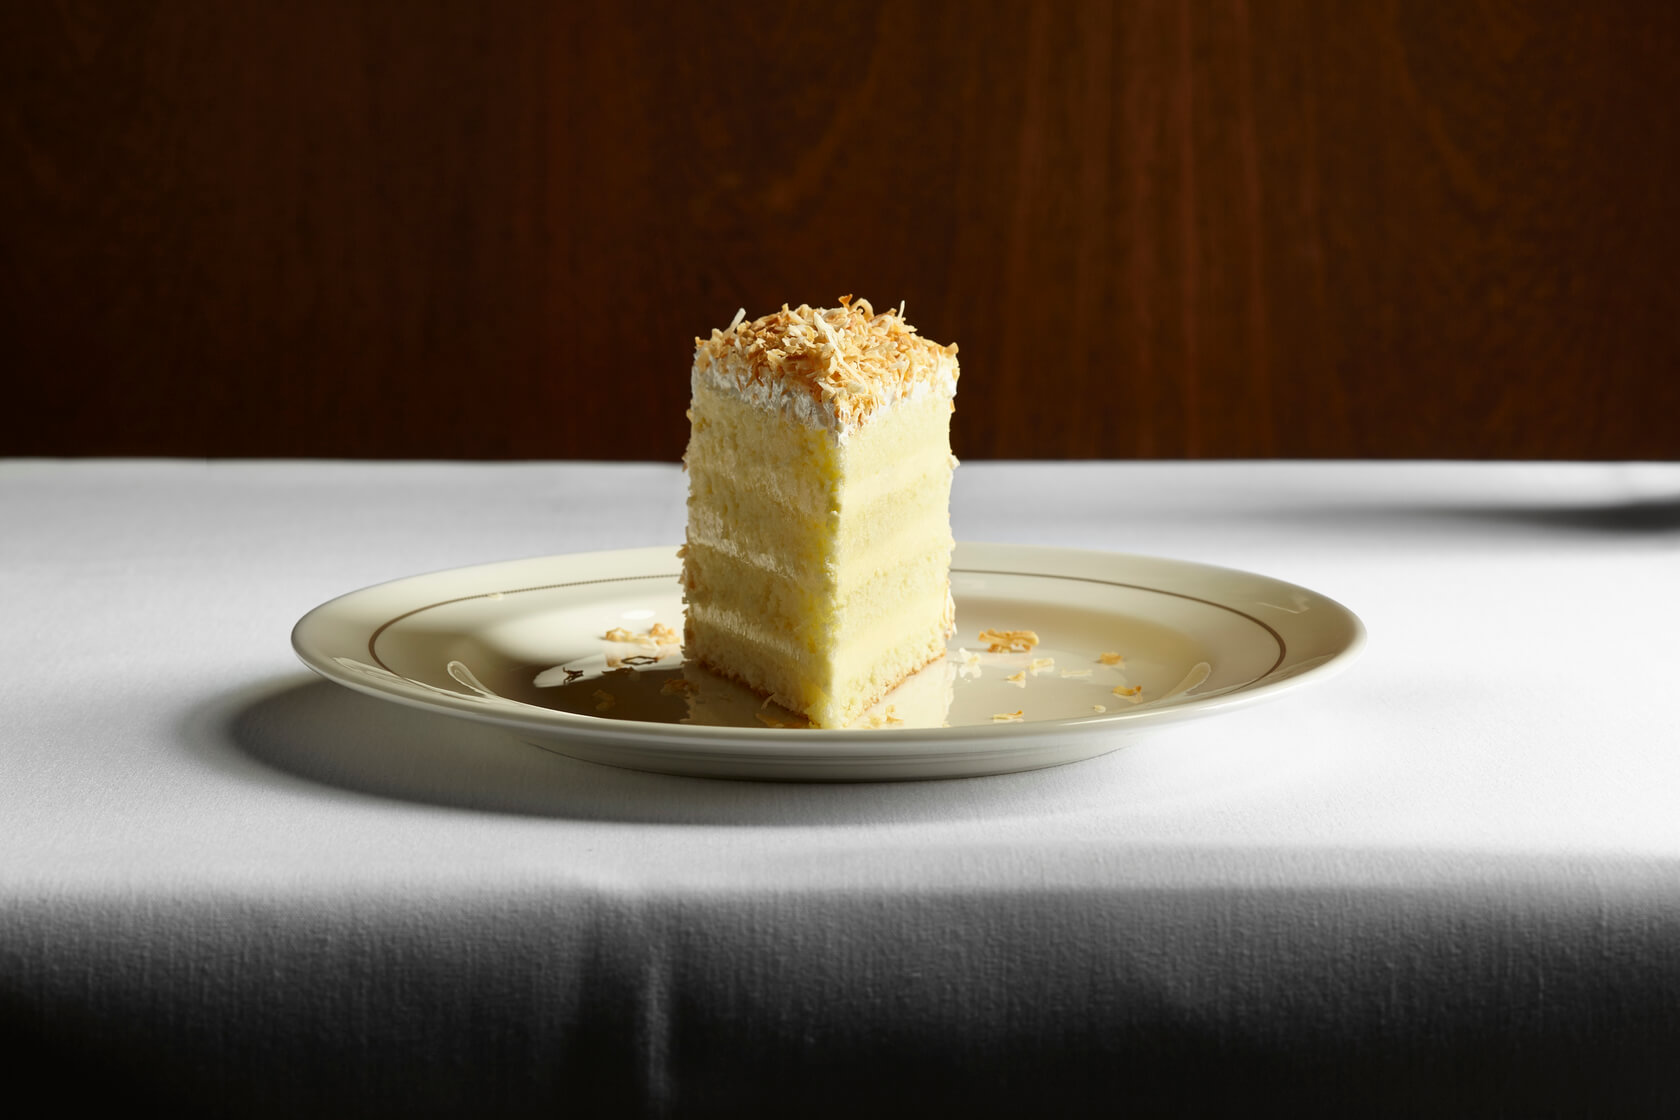 Chef Keller's The Grill Coconut Cake